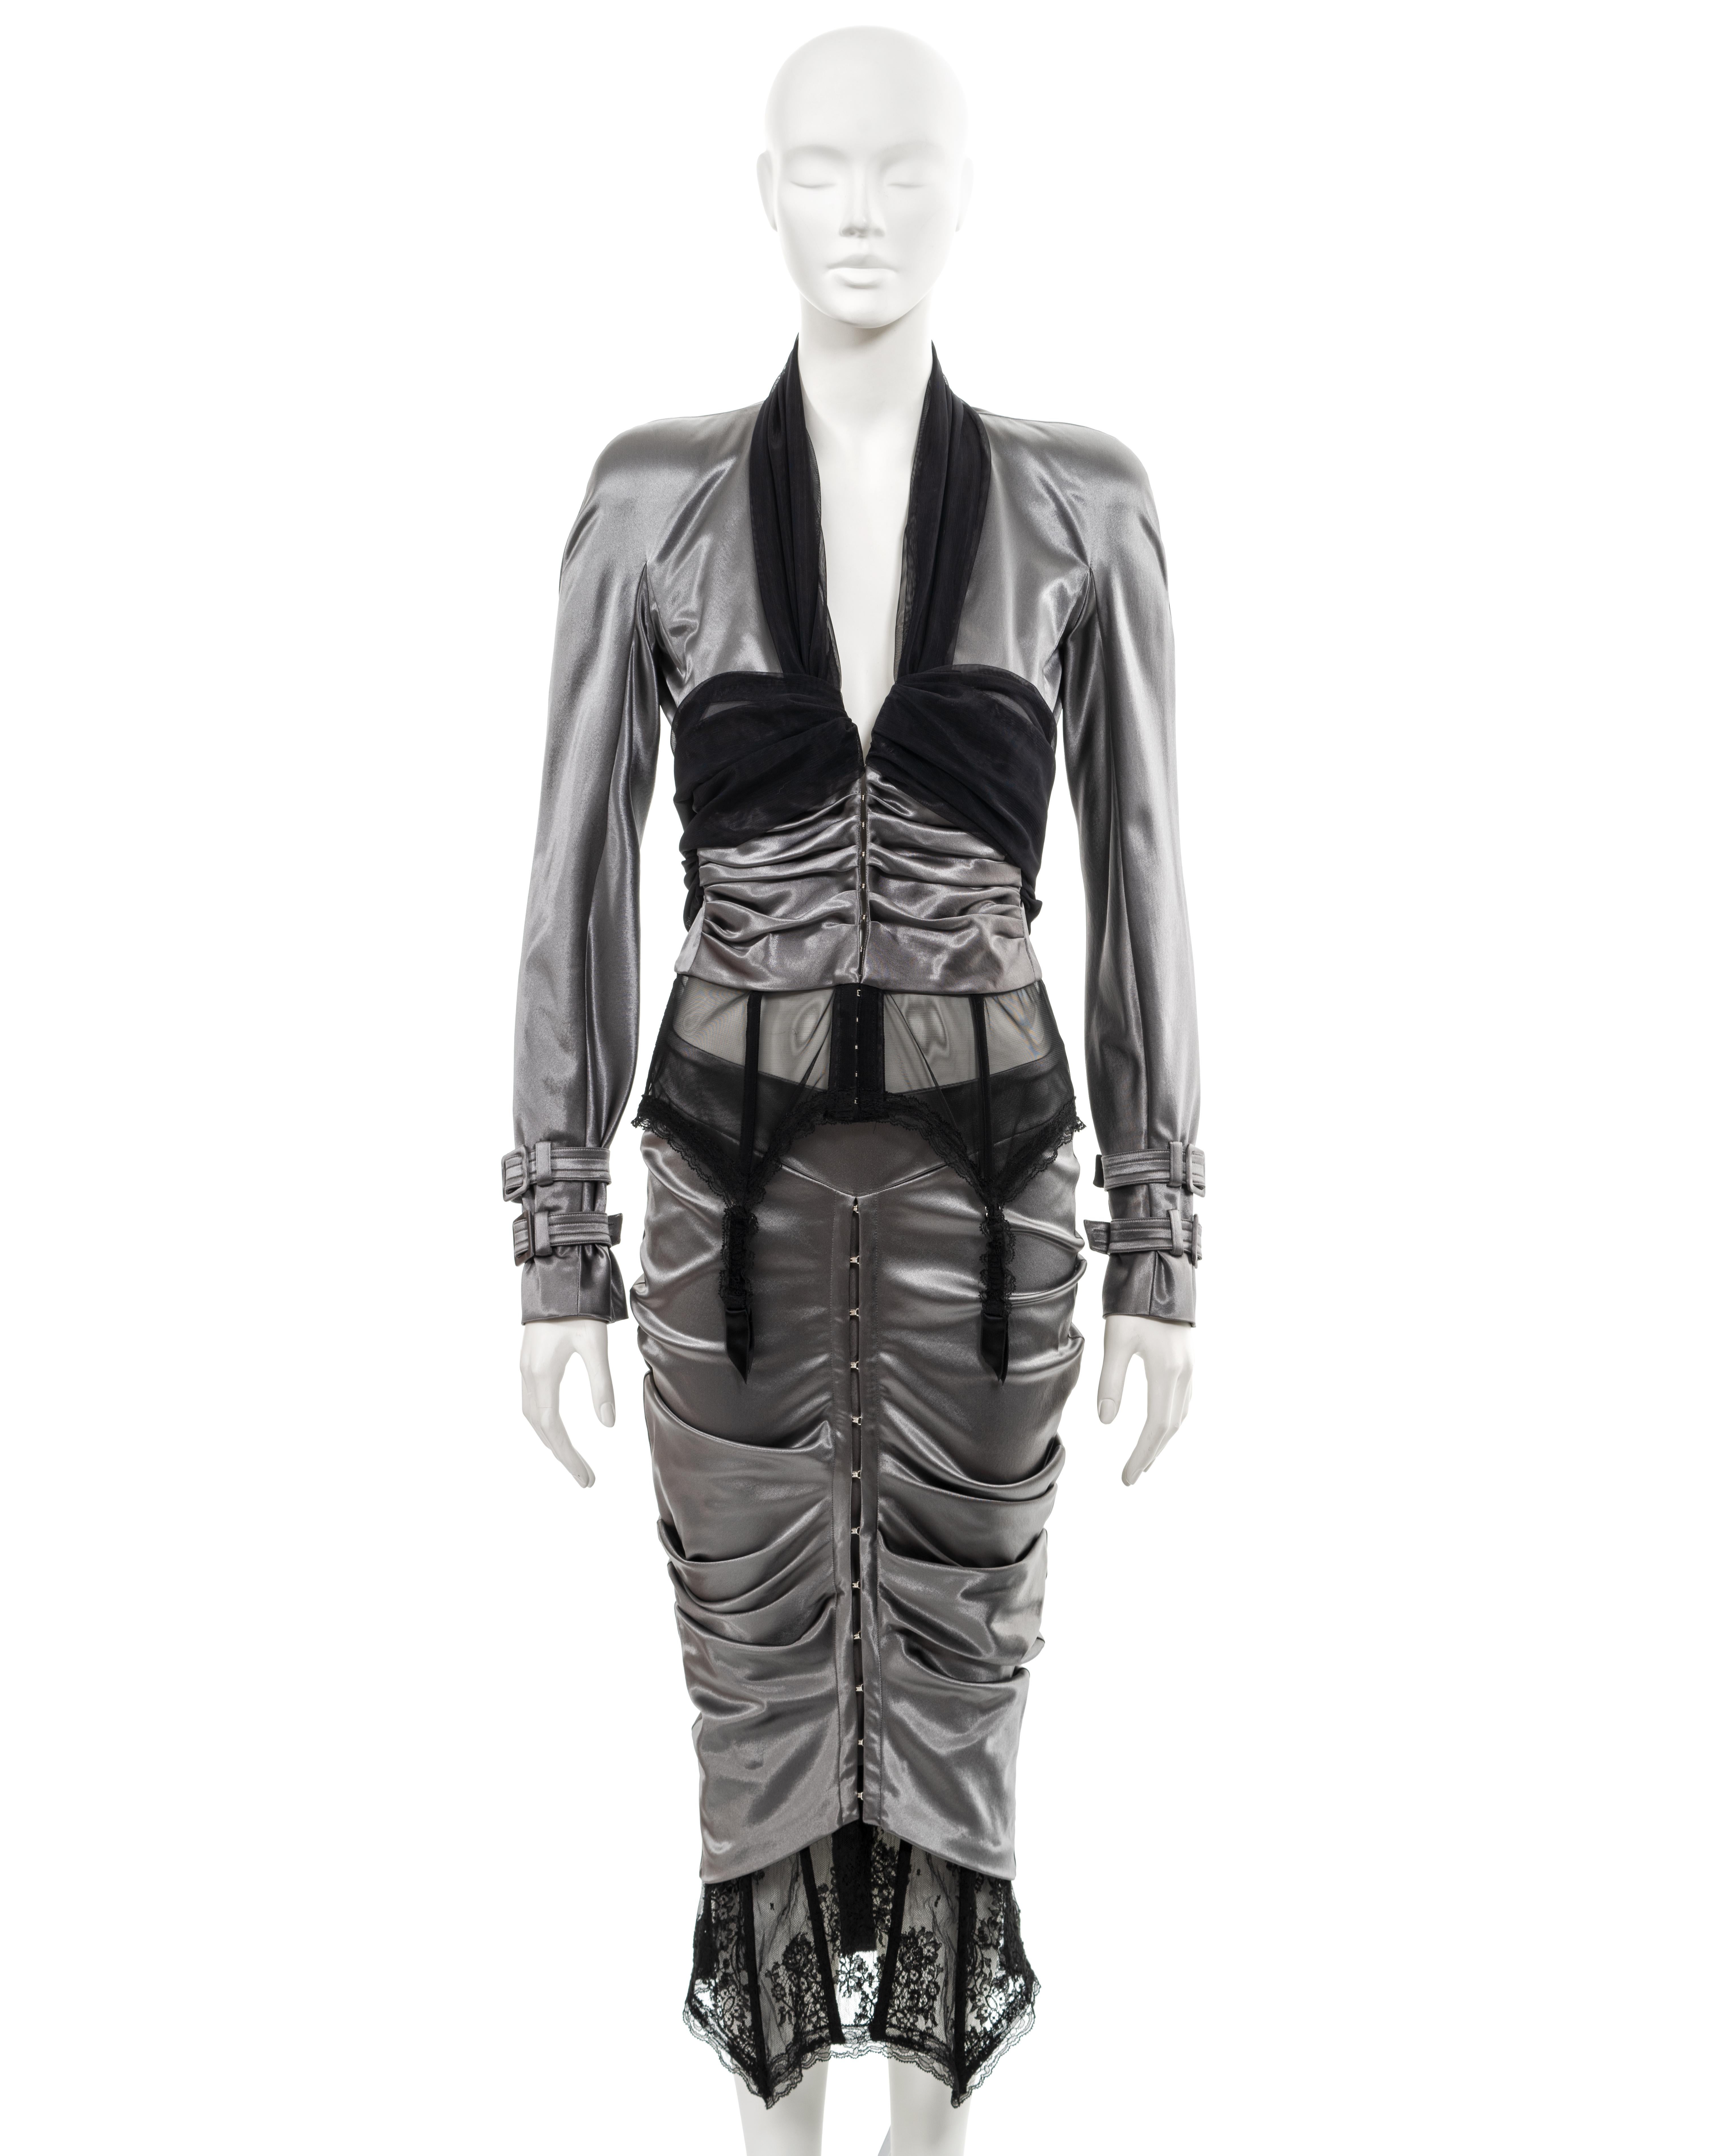 ▪ Christian Dior evening skirt suit 
▪ Creative Director: John Galliano
▪ Sold by One of a Kind Archive
▪ 'Homage to Marlene', Spring-Summer 2004
▪ Museum Grade
▪ Constructed from silver-grey stretch satin 
▪ Jacket and skirt with boned suspender